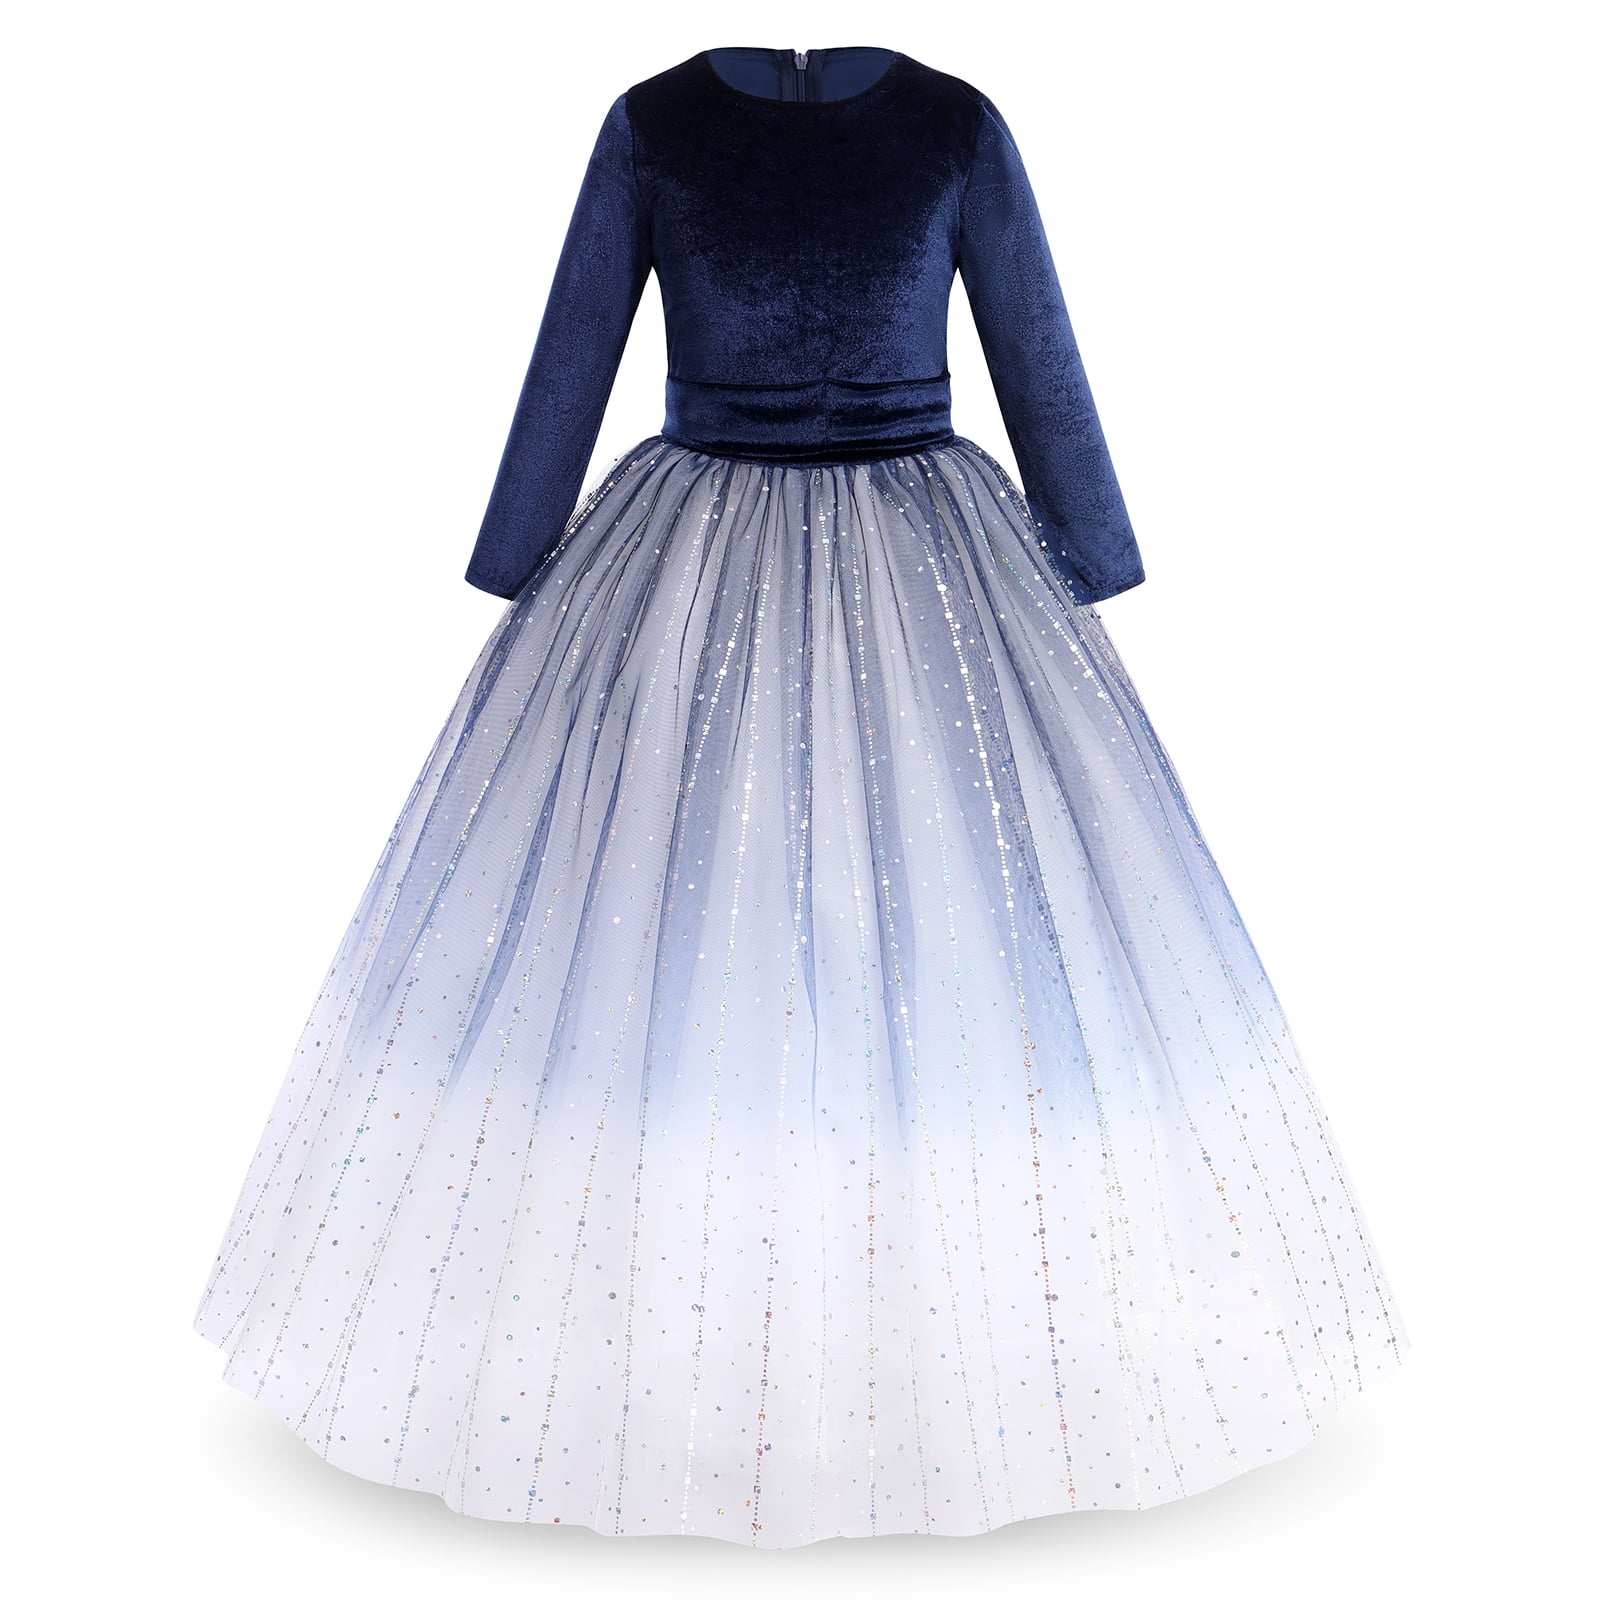 Buy NNJXD Girls Princess Pageant Dress Kids Prom Ball Gowns Wedding Party  Flower Dresses (7-8 Years, Blue 4) at Amazon.in